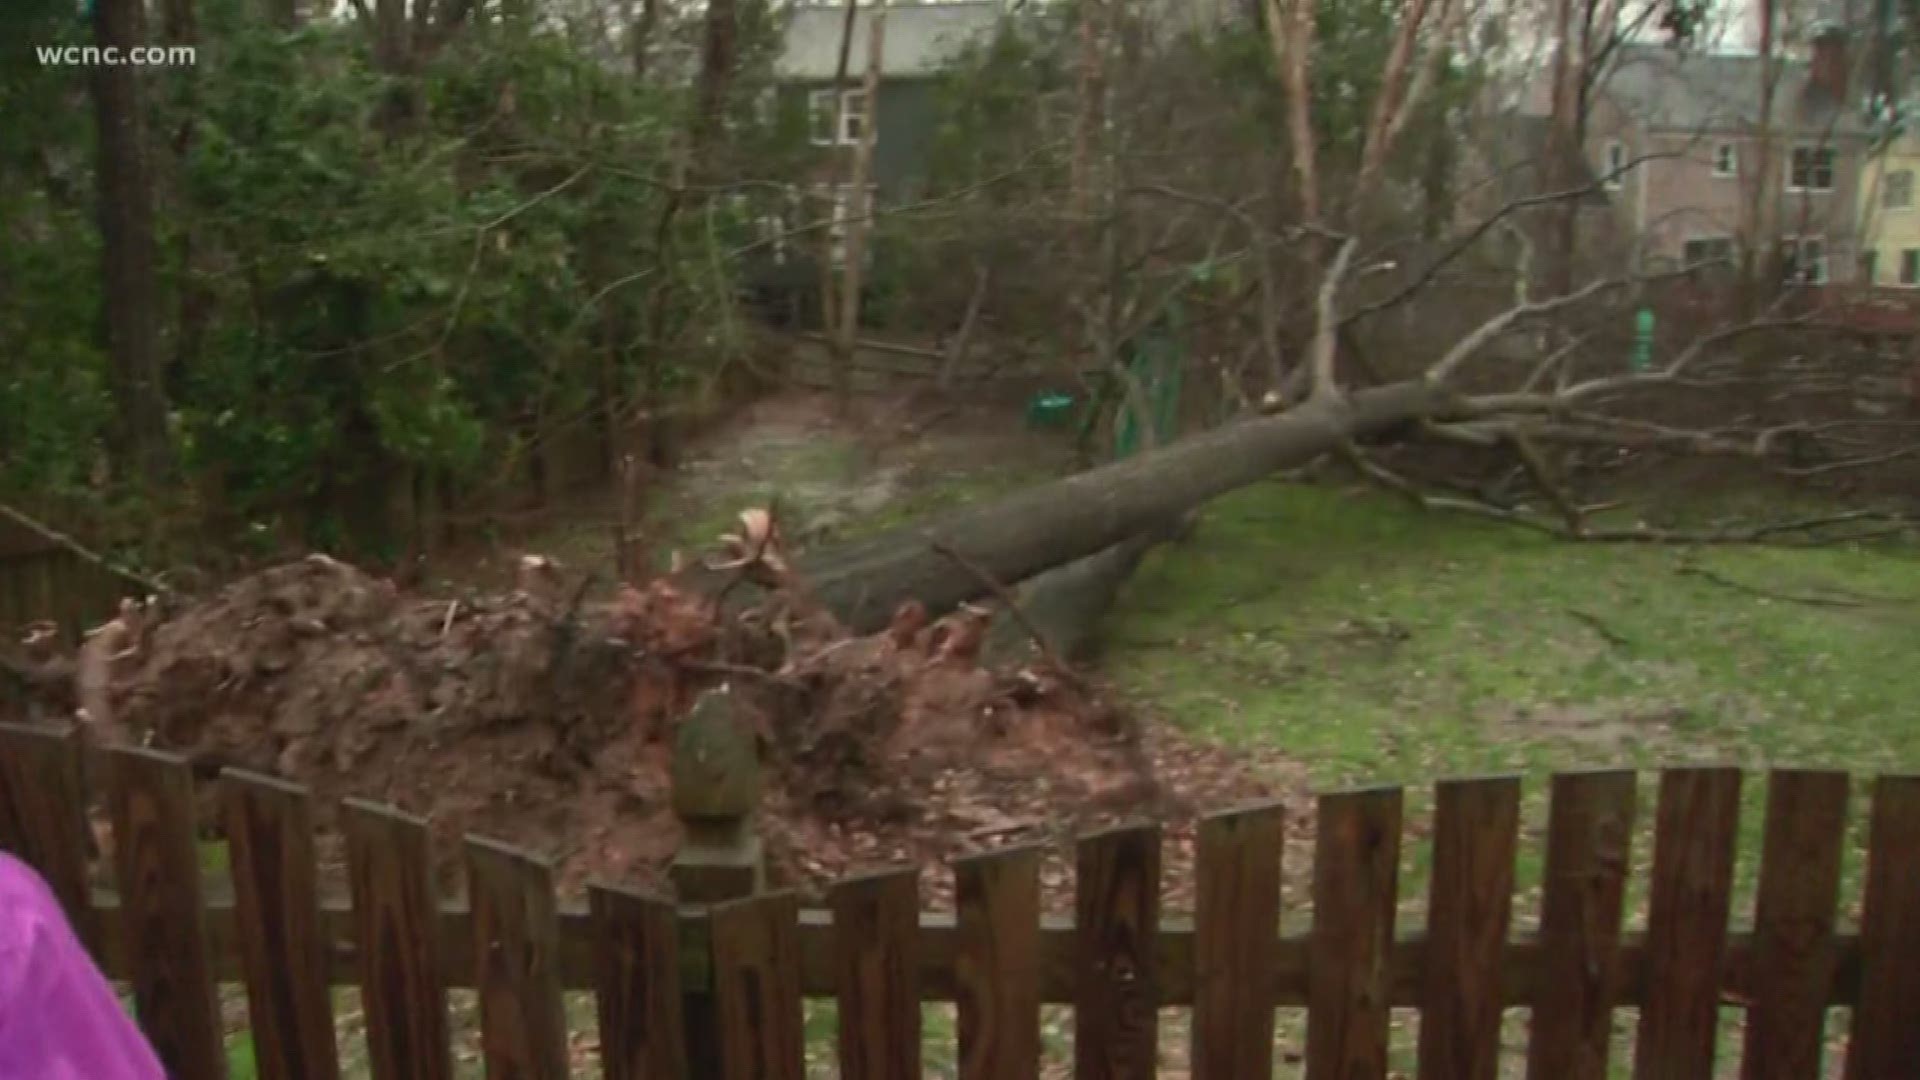 A grandmother said she took cover with her young grandson in the bathroom in south Charlotte Thursday afternoon as a possible tornado knocked trees down.